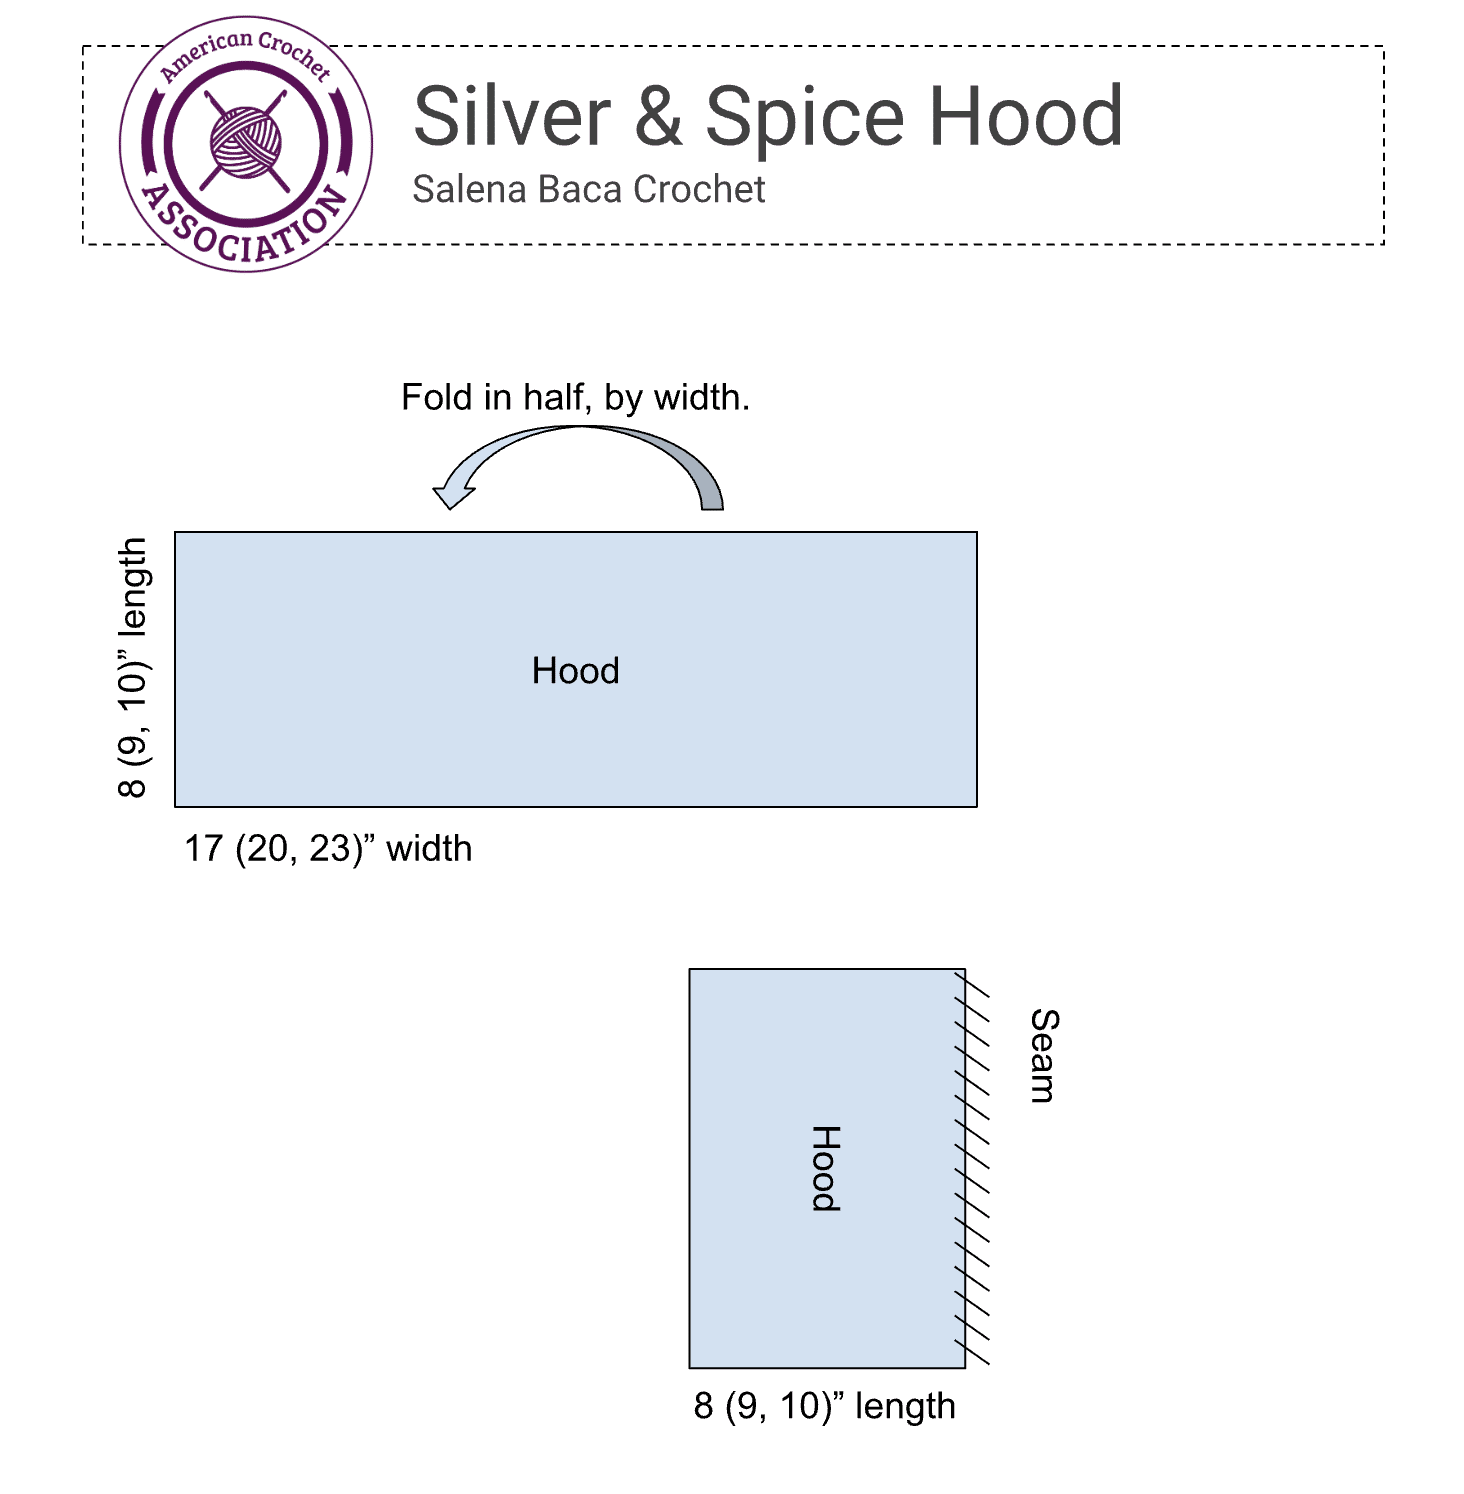 Silver and spice crochet hood construction diagram